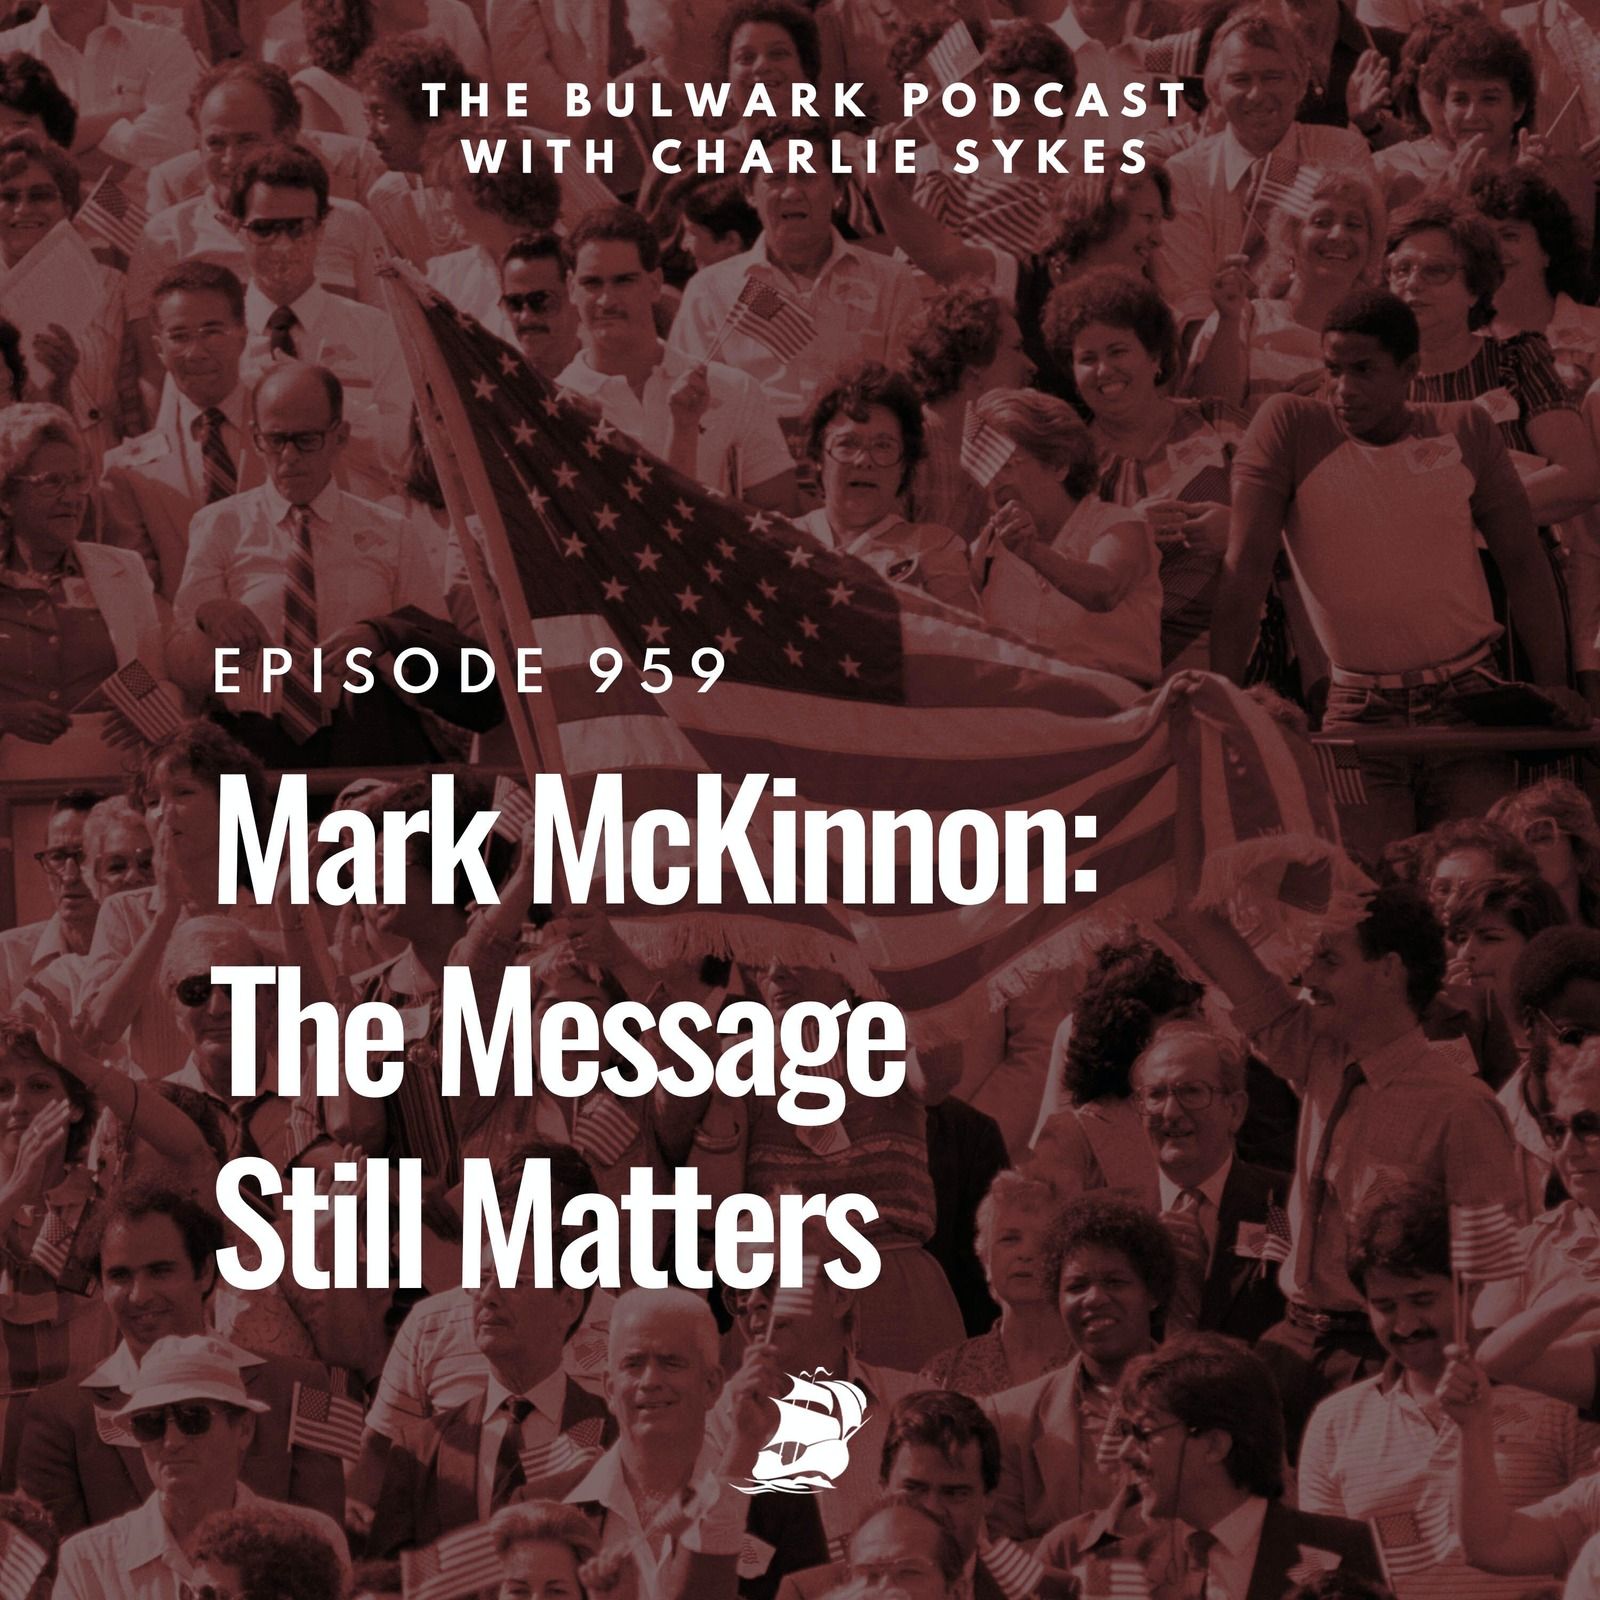 Mark McKinnon: The Message Still Matters by The Bulwark Podcast